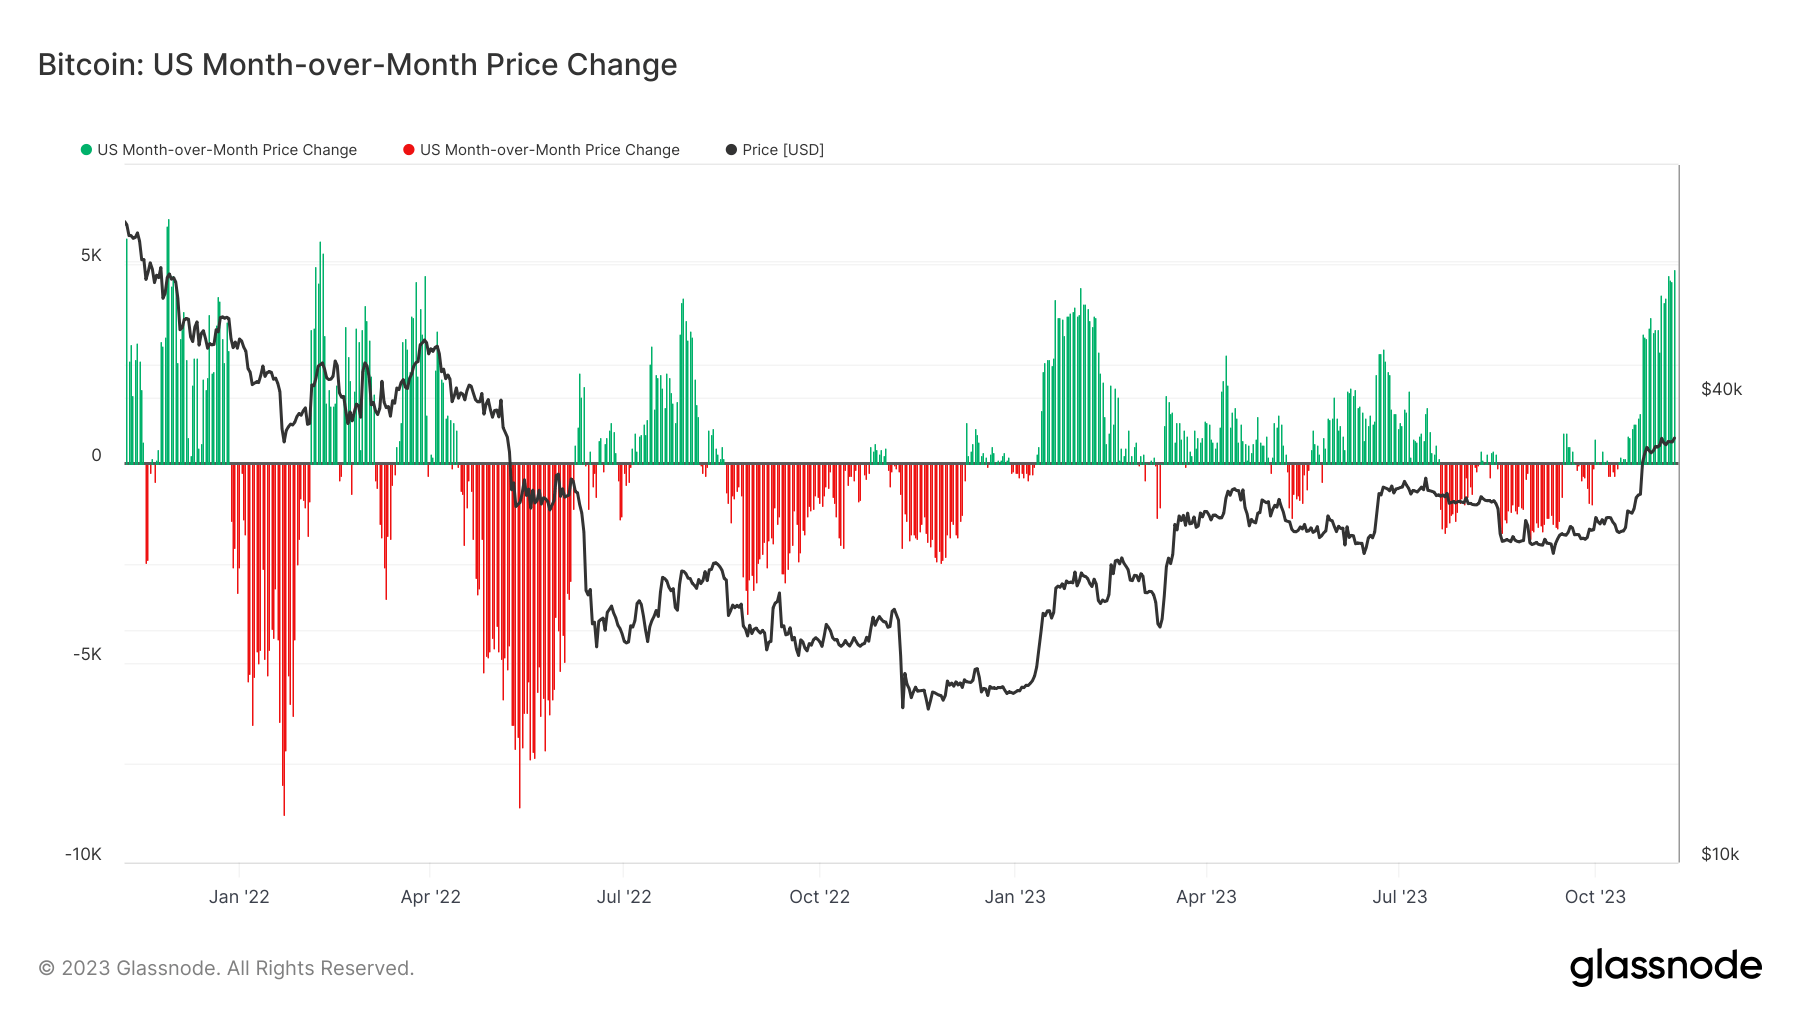 Bitcoin month-over-month price change during U.S. trading hours. Source: Glassnode